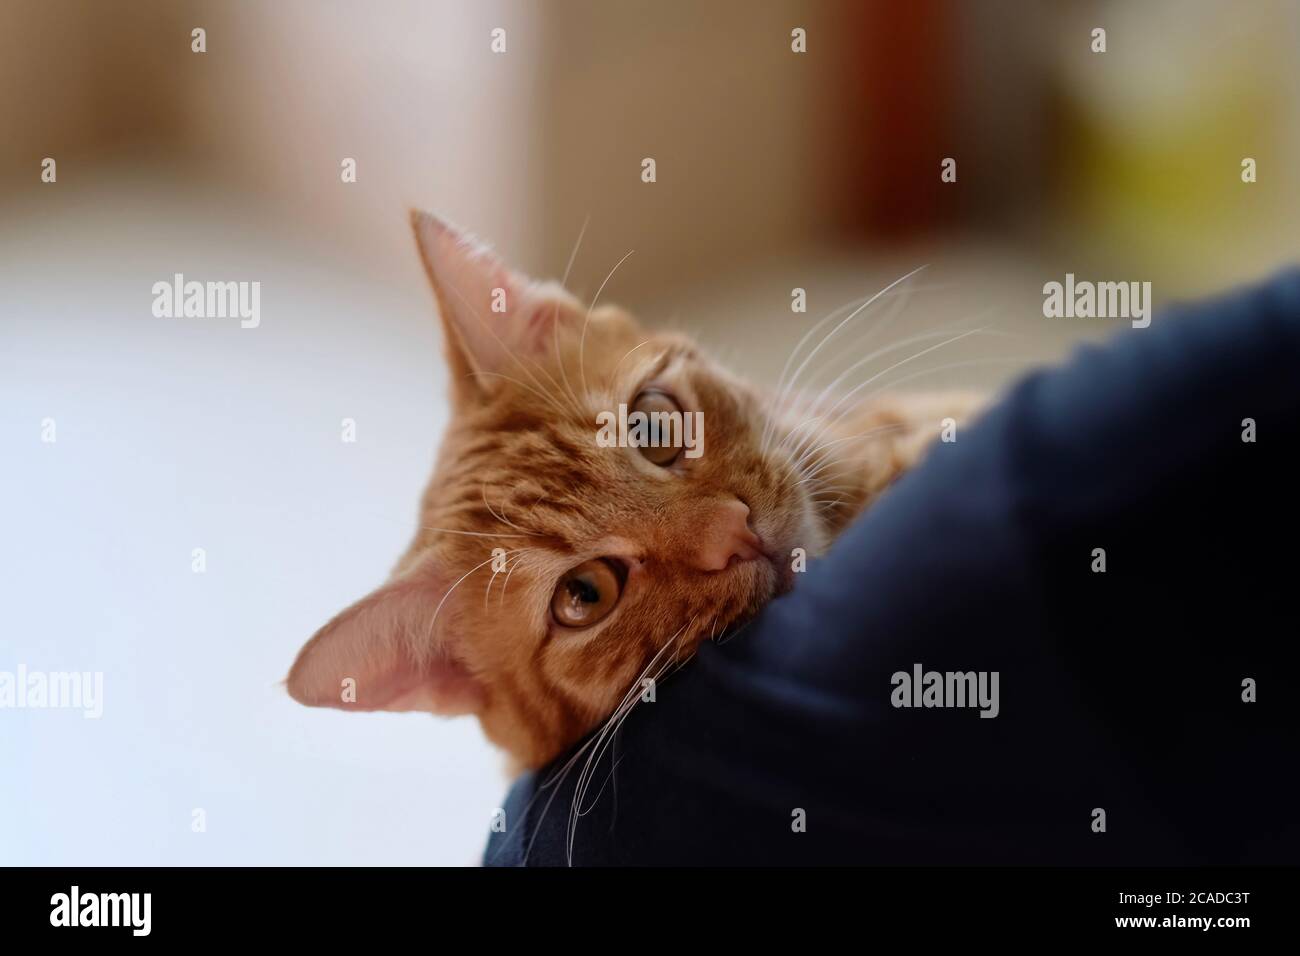 close up one brown tabby cat in people's arm. Looking at camera. Blur bright background Stock Photo